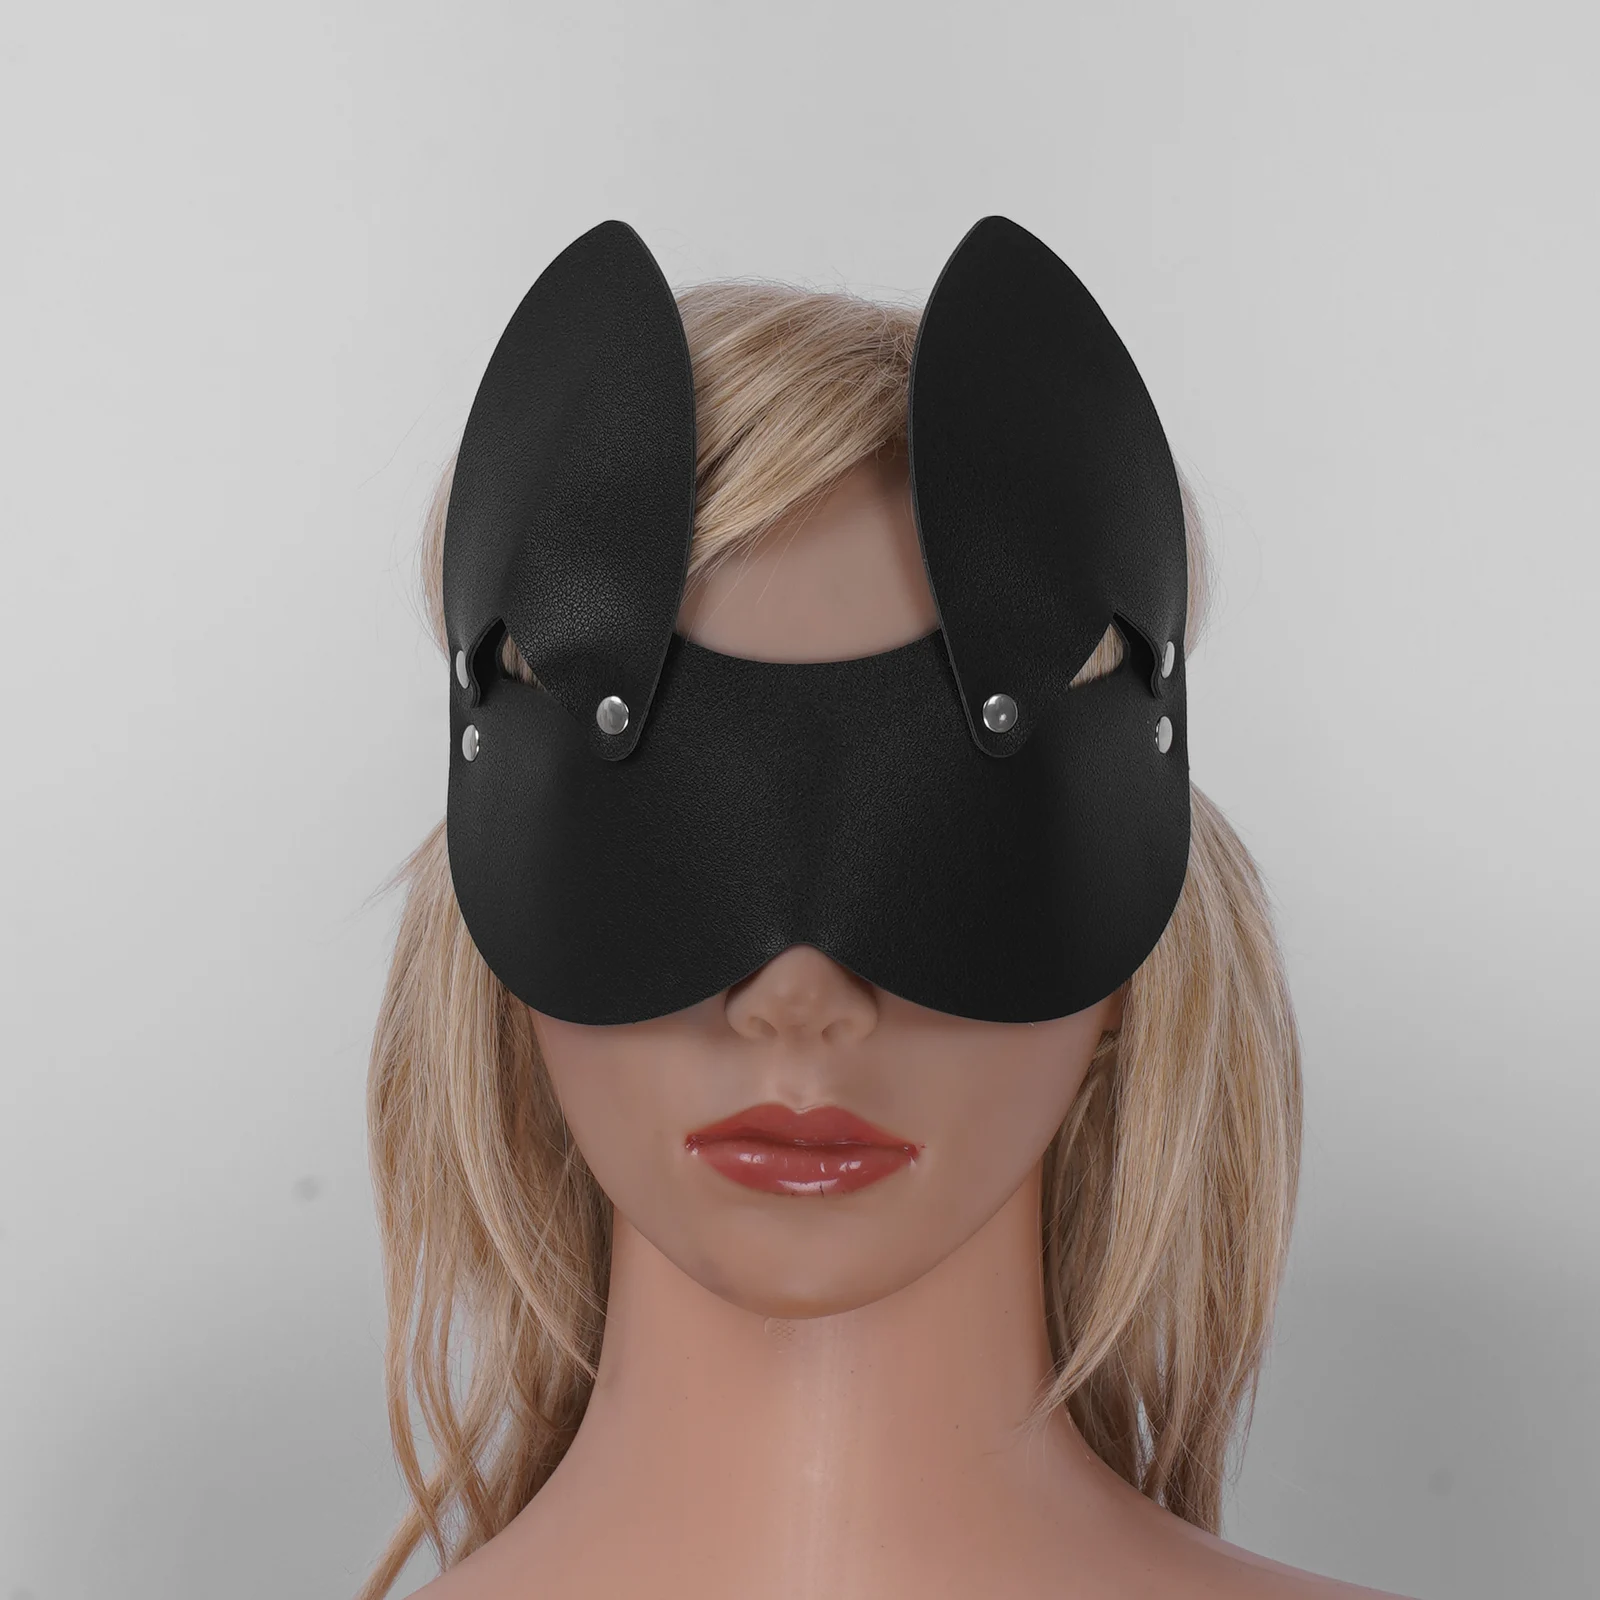 

Punk Style Simple Personality Cat Ears Adjustable PU Leather Rivets Decor Eye Mask for Party Masquerade extioc Accessories